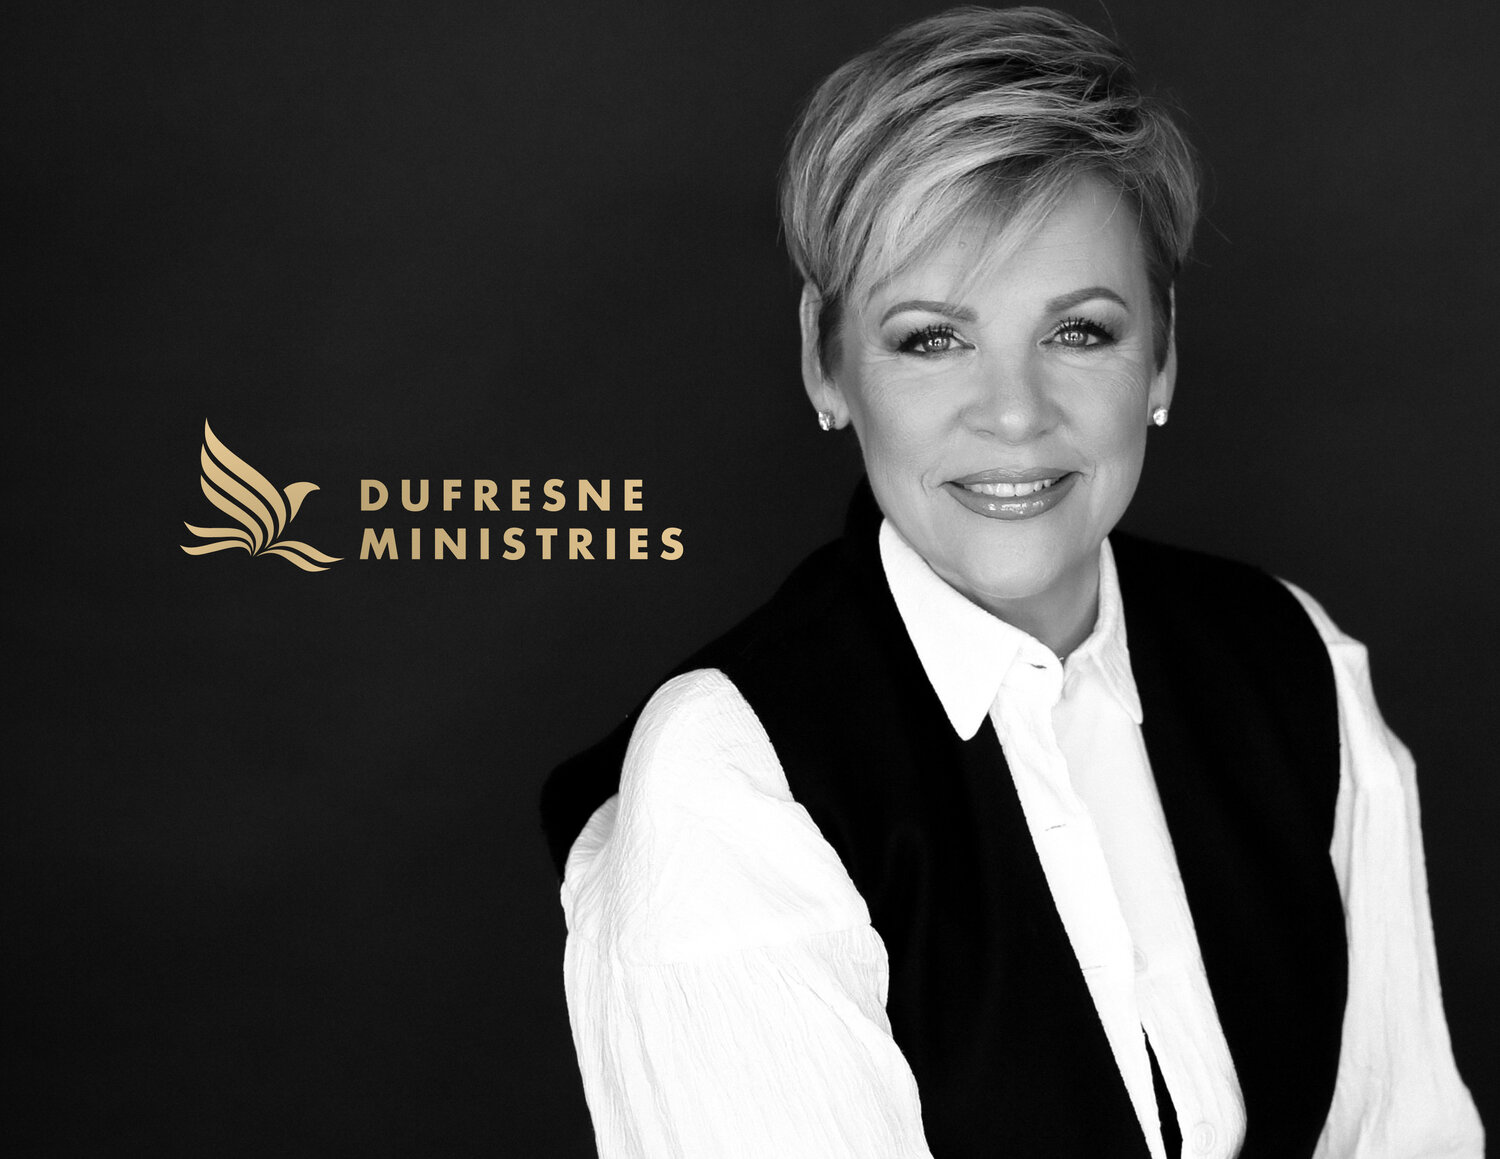 Dufresne Ministries